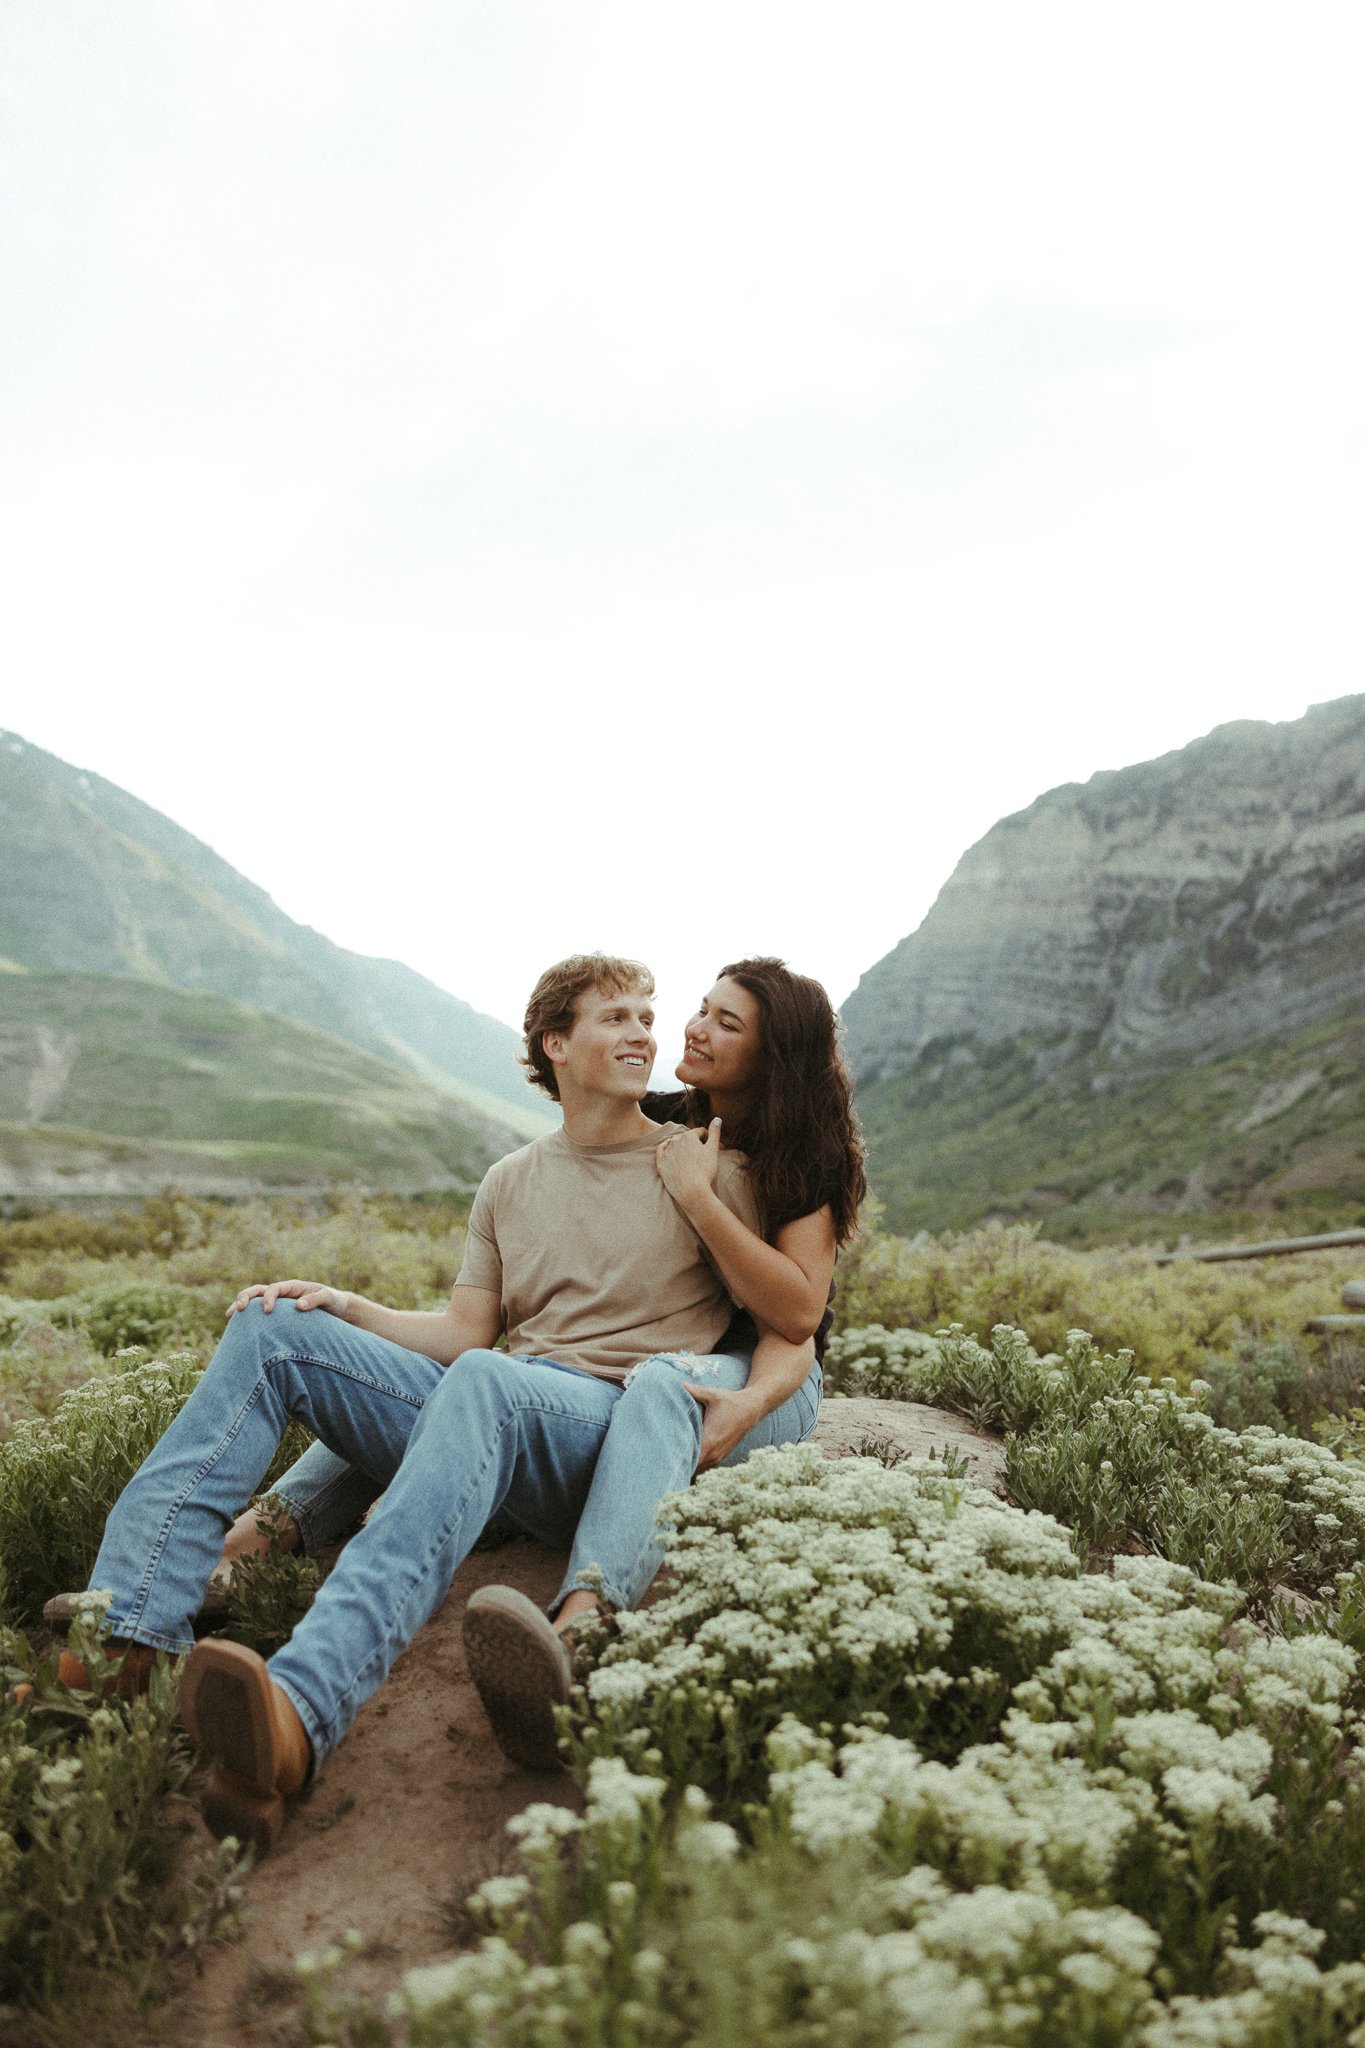 Spring-Provo-Canyon-Wildflowers-Engagement-Session-66